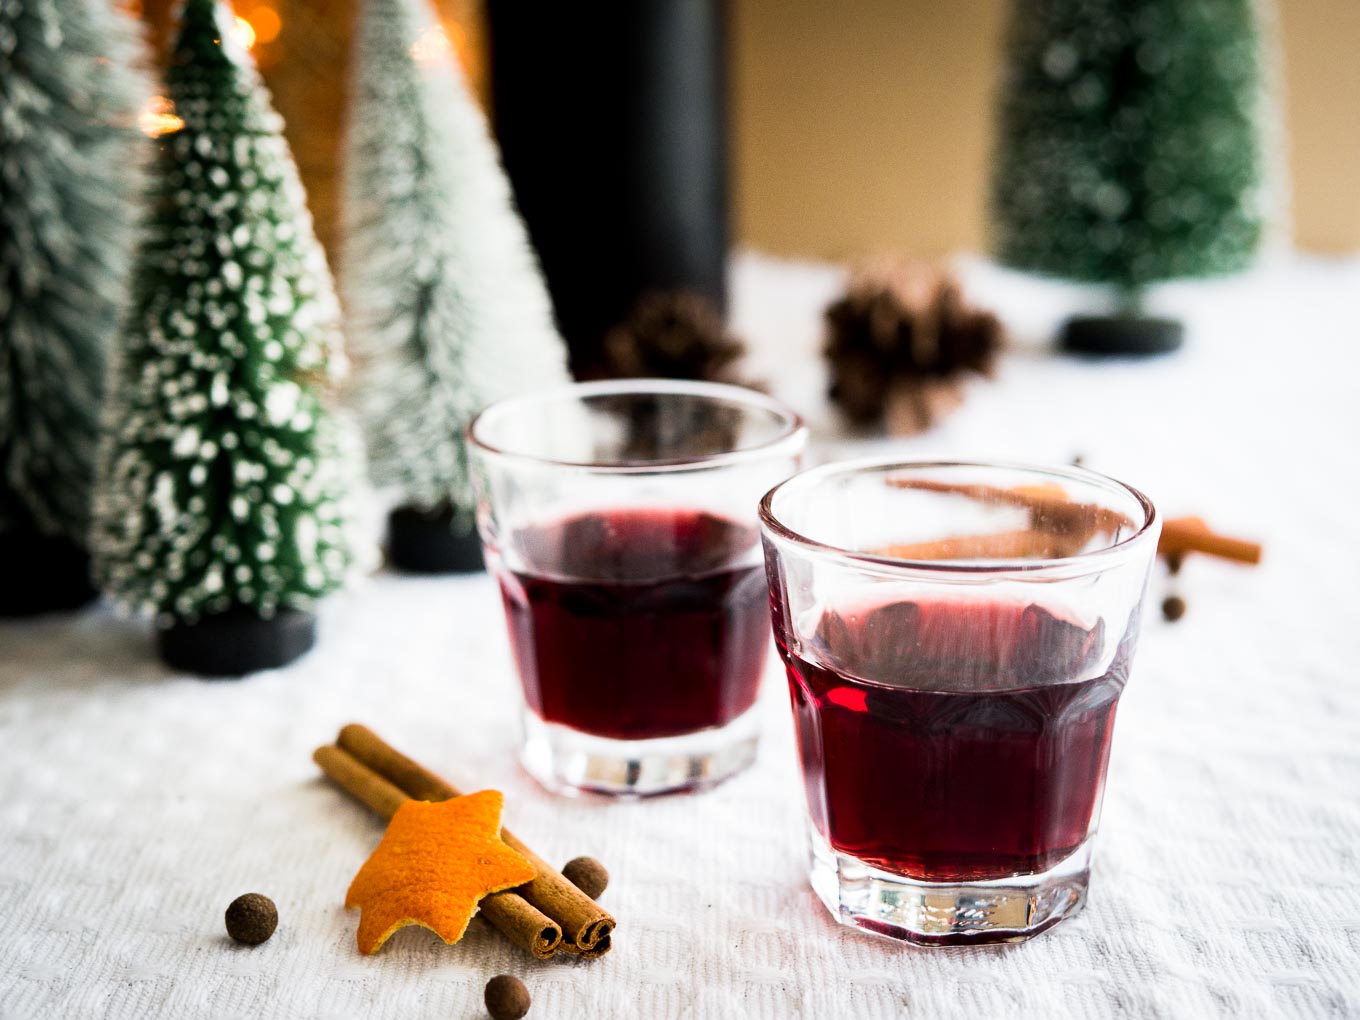 This easy mulled wine liqueur makes a perfect Christmas gift! Dark rum and red wine are infused with mulling spices, making this homemade drink as festive as the holiday season gets.